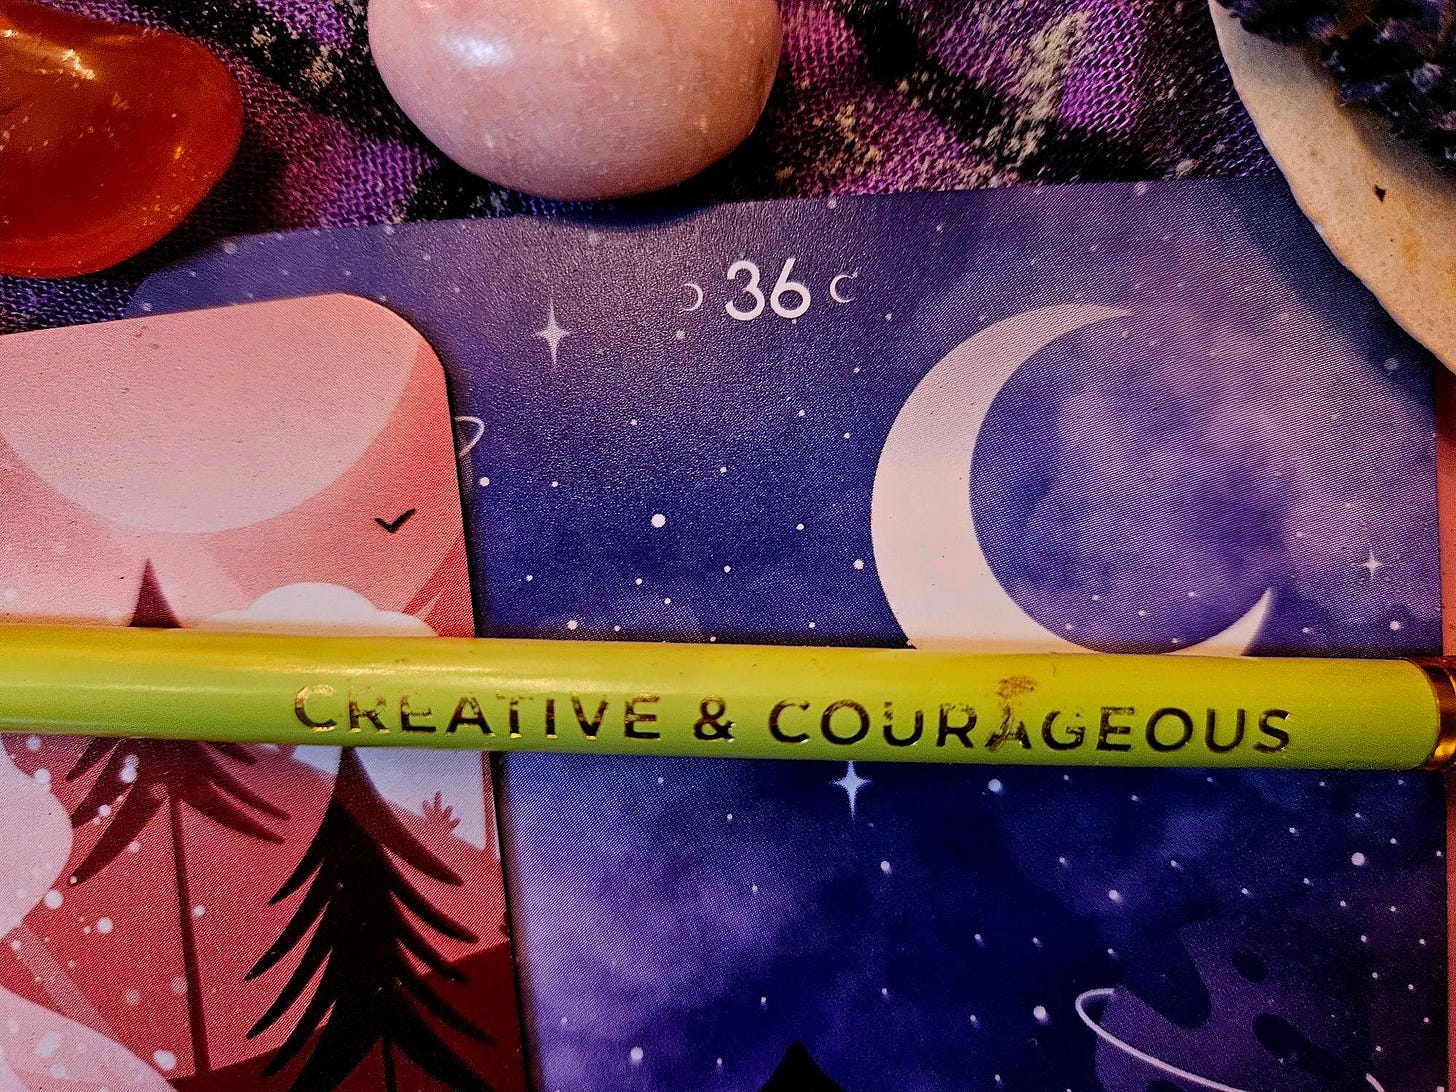 The yellow green “creative and courageous” pencil from my writing session in Emily Dickinson’s bedroom (Real Writing in the World #9) on a background of orange and purple oracle cards showing trees and a moon, and orange-red carnelian and pink Mangano calcite crystals.